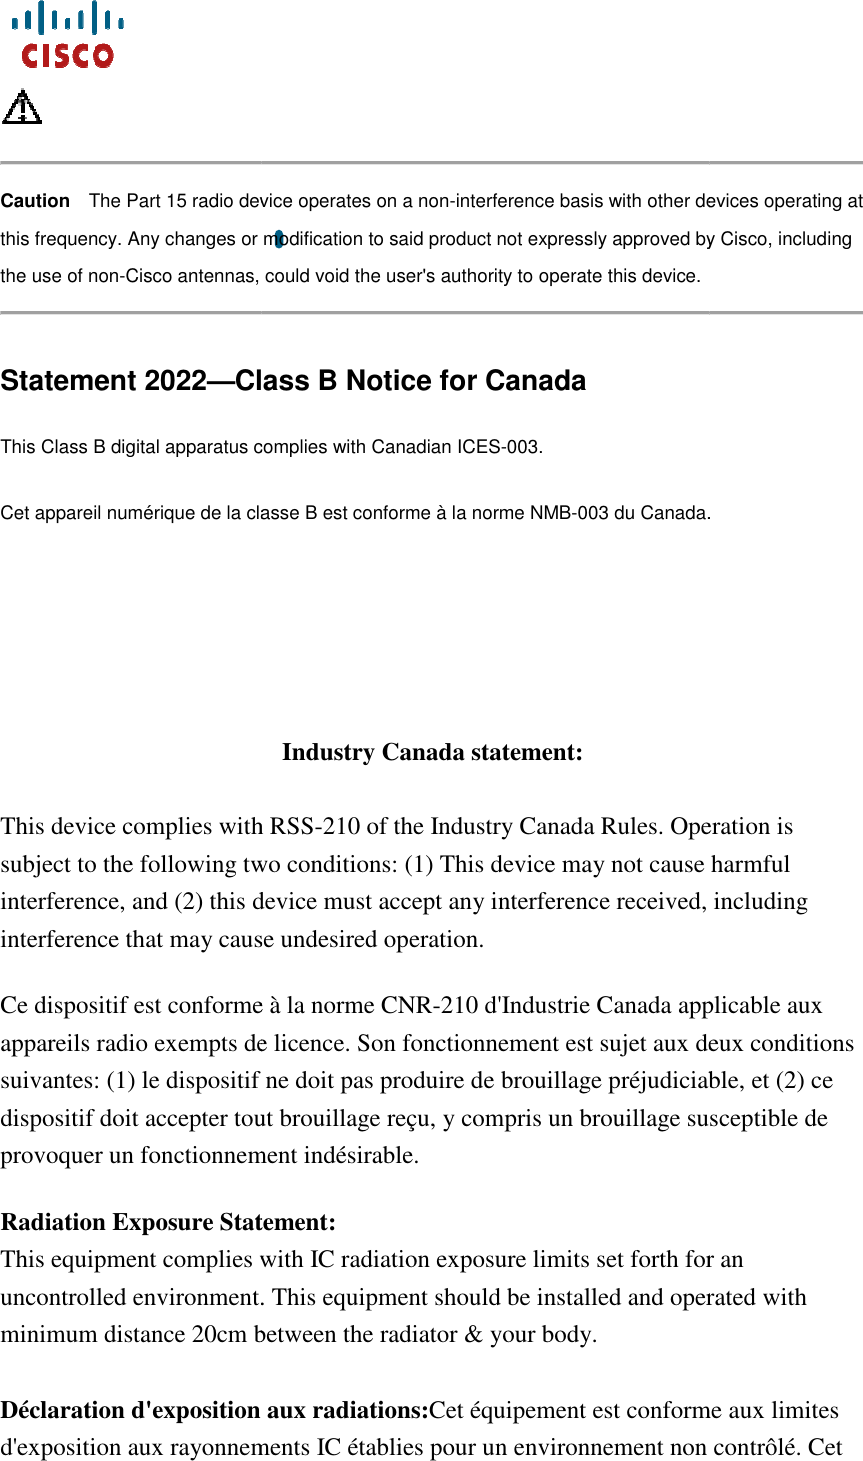     Caution The Part 15 radio device this frequency. Any changes or modification to said product not expressly approved by Cisco, including the use of non-Cisco antennas, could void the user&apos;s authority to operate this devicStatement 2022—Class B Notice for CanadaThis Class B digital apparatus complies with Canadian ICESCet appareil numérique de la classe B est conforme à la norme NMB    This device complies with RSSsubject to the following two conditions: (1) This device may not cause harmful interference, and (2) this device must accept any interference received, including interference that may cause undesired operation.Ce dispositif est conforme à la norme CNRappareils radio exempts de licence. Son fonctionnement est sujet aux deux conditions suivantes: (1) le dispositif ne doit pas produire de brouillage préjudiciable, et (2) ce dispositif doit accepter tout brouillage reçu, y compris un brouillage susceptible de provoquer un fonctionnement indésirable. Radiation Exposure Statement:This equipment complies with IC radiation exposure limits set forth for an uncontrolled environment.minimum distance 20cm between the radiator &amp; your body. Déclaration d&apos;exposition aux radiations:d&apos;exposition aux rayonnements IC établies pour un environnement nThe Part 15 radio device operates on a non-interference basis with other devices operating at this frequency. Any changes or modification to said product not expressly approved by Cisco, including Cisco antennas, could void the user&apos;s authority to operate this device. Class B Notice for Canada This Class B digital apparatus complies with Canadian ICES-003. Cet appareil numérique de la classe B est conforme à la norme NMB-003 du Canada.Industry Canada statement: This device complies with RSS-210 of the Industry Canada Rules. Operation is subject to the following two conditions: (1) This device may not cause harmful interference, and (2) this device must accept any interference received, including interference that may cause undesired operation.   Ce dispositif est conforme à la norme CNR-210 d&apos;Industrie Canada applicable aux appareils radio exempts de licence. Son fonctionnement est sujet aux deux conditions suivantes: (1) le dispositif ne doit pas produire de brouillage préjudiciable, et (2) ce spositif doit accepter tout brouillage reçu, y compris un brouillage susceptible de provoquer un fonctionnement indésirable.  Radiation Exposure Statement: This equipment complies with IC radiation exposure limits set forth for an uncontrolled environment. This equipment should be installed and operated with minimum distance 20cm between the radiator &amp; your body. Déclaration d&apos;exposition aux radiations:Cet équipement est conforme aux limites d&apos;exposition aux rayonnements IC établies pour un environnement non contrôlé. Cet  interference basis with other devices operating at this frequency. Any changes or modification to said product not expressly approved by Cisco, including   003 du Canada. of the Industry Canada Rules. Operation is subject to the following two conditions: (1) This device may not cause harmful interference, and (2) this device must accept any interference received, including 210 d&apos;Industrie Canada applicable aux appareils radio exempts de licence. Son fonctionnement est sujet aux deux conditions suivantes: (1) le dispositif ne doit pas produire de brouillage préjudiciable, et (2) ce spositif doit accepter tout brouillage reçu, y compris un brouillage susceptible de This equipment complies with IC radiation exposure limits set forth for an This equipment should be installed and operated with Cet équipement est conforme aux limites on contrôlé. Cet 